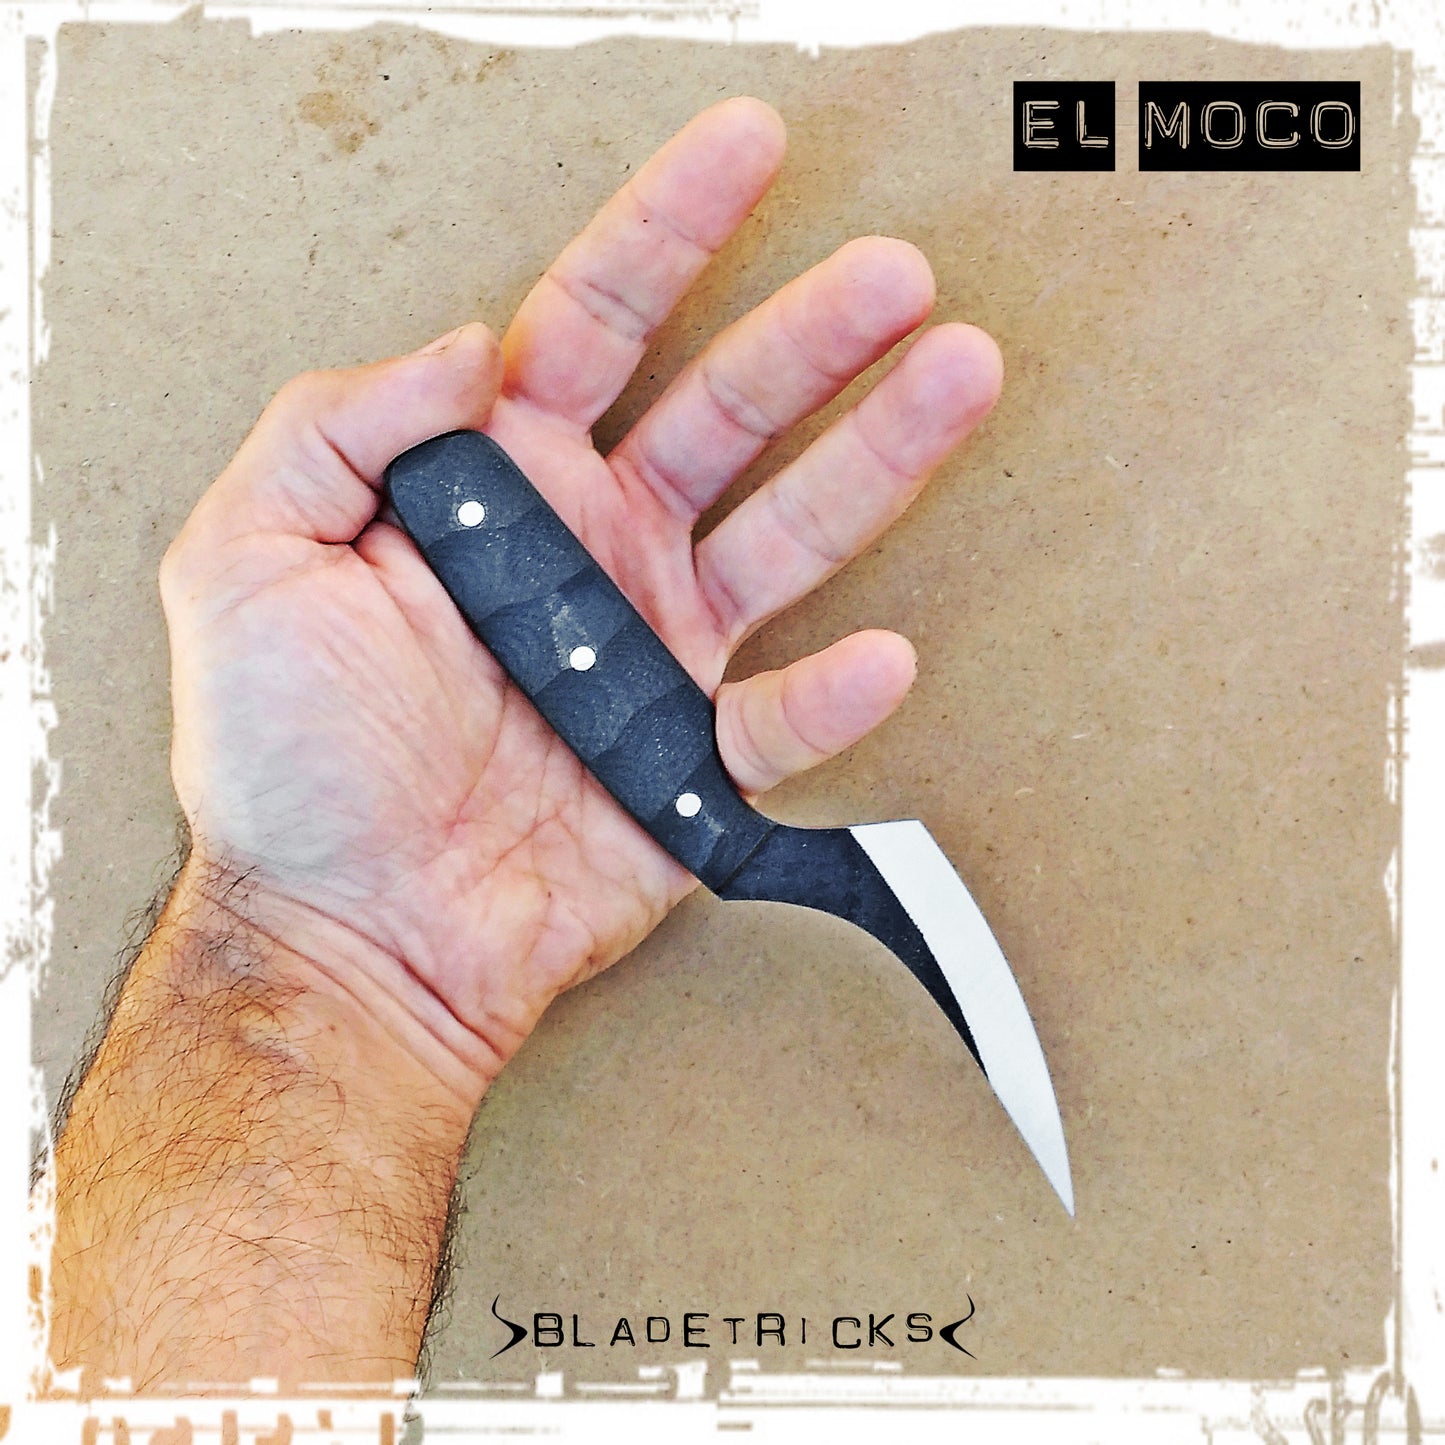 Best EDC urban carry tactical knife